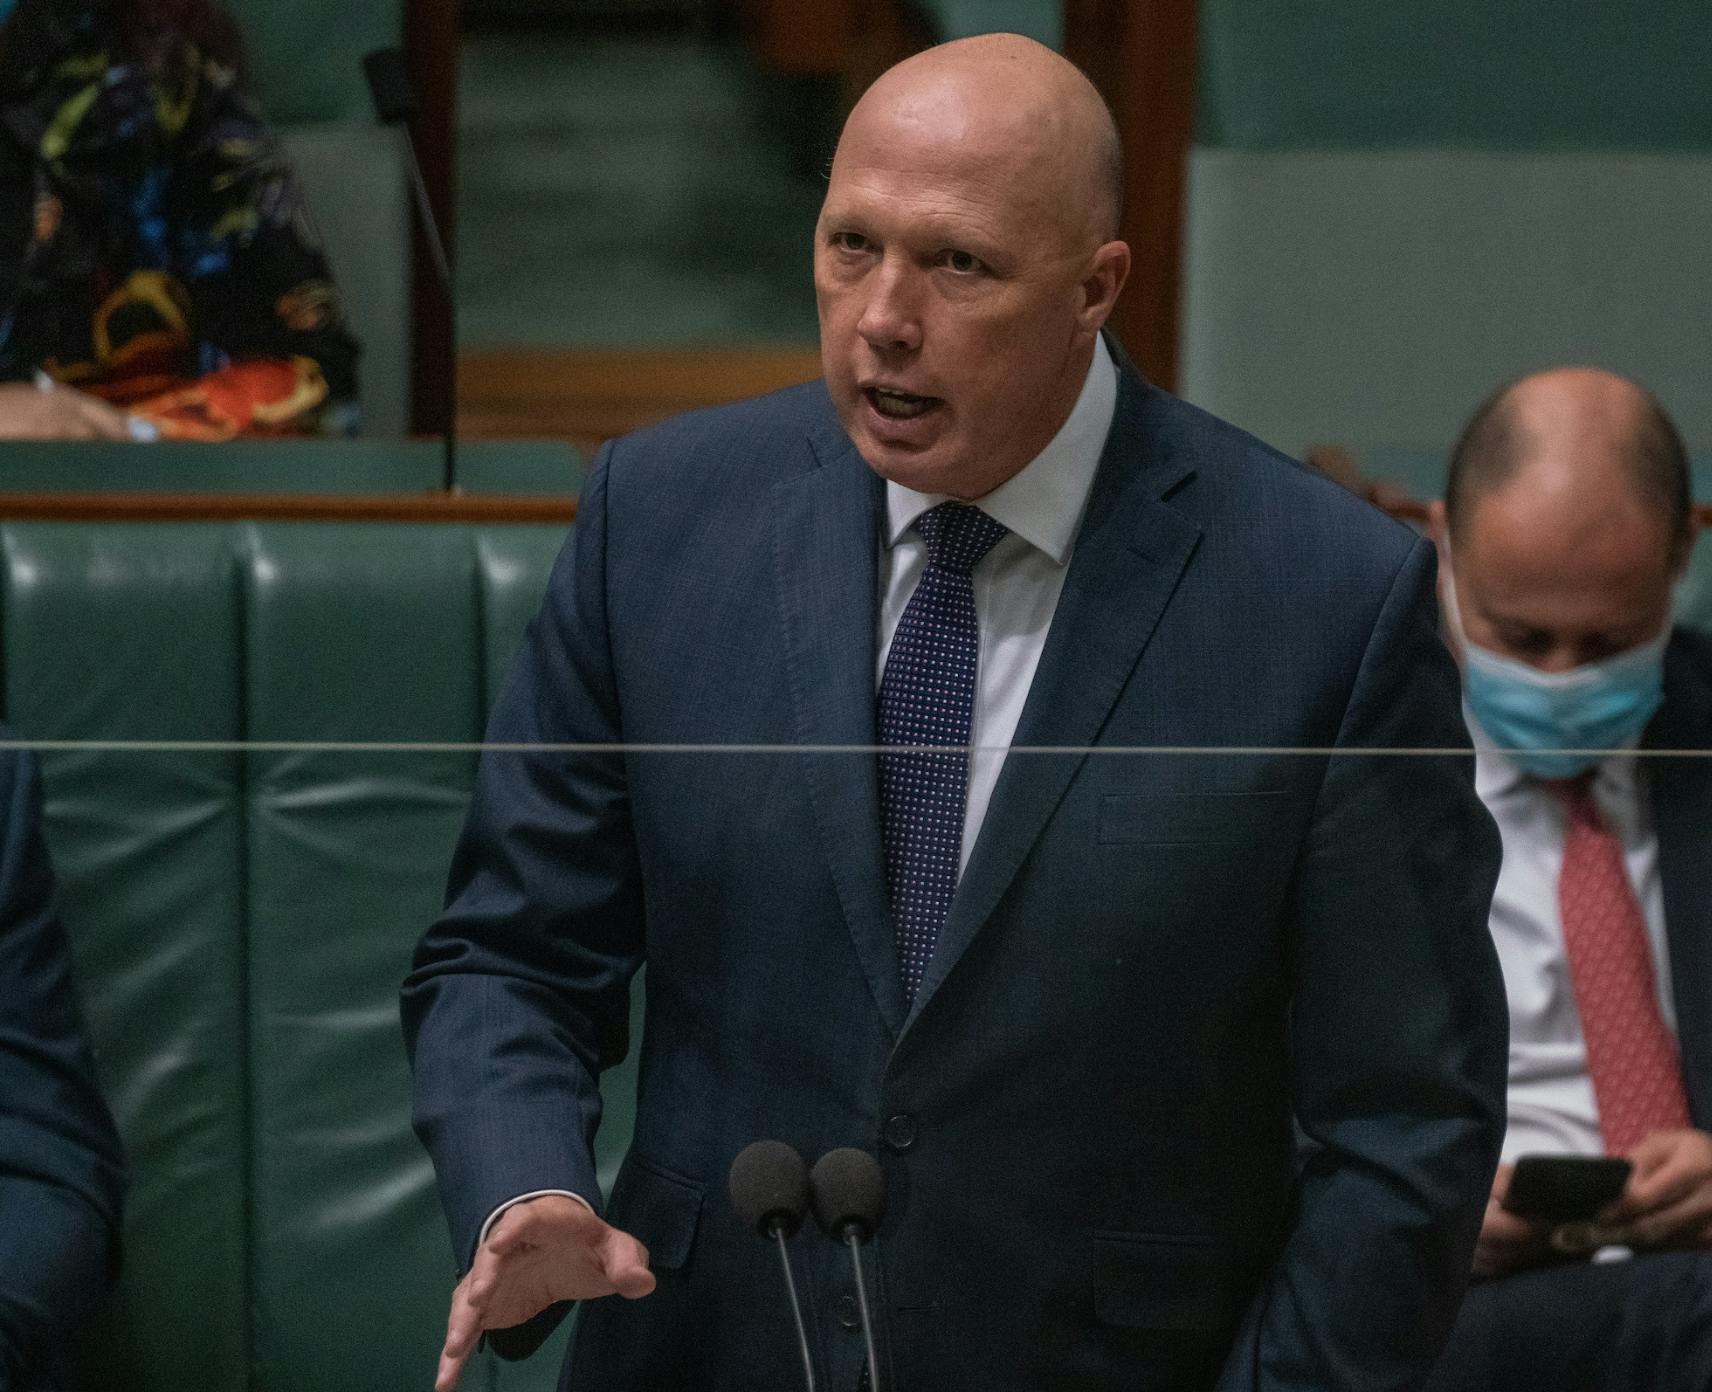 Peter Dutton speaking during Question Time